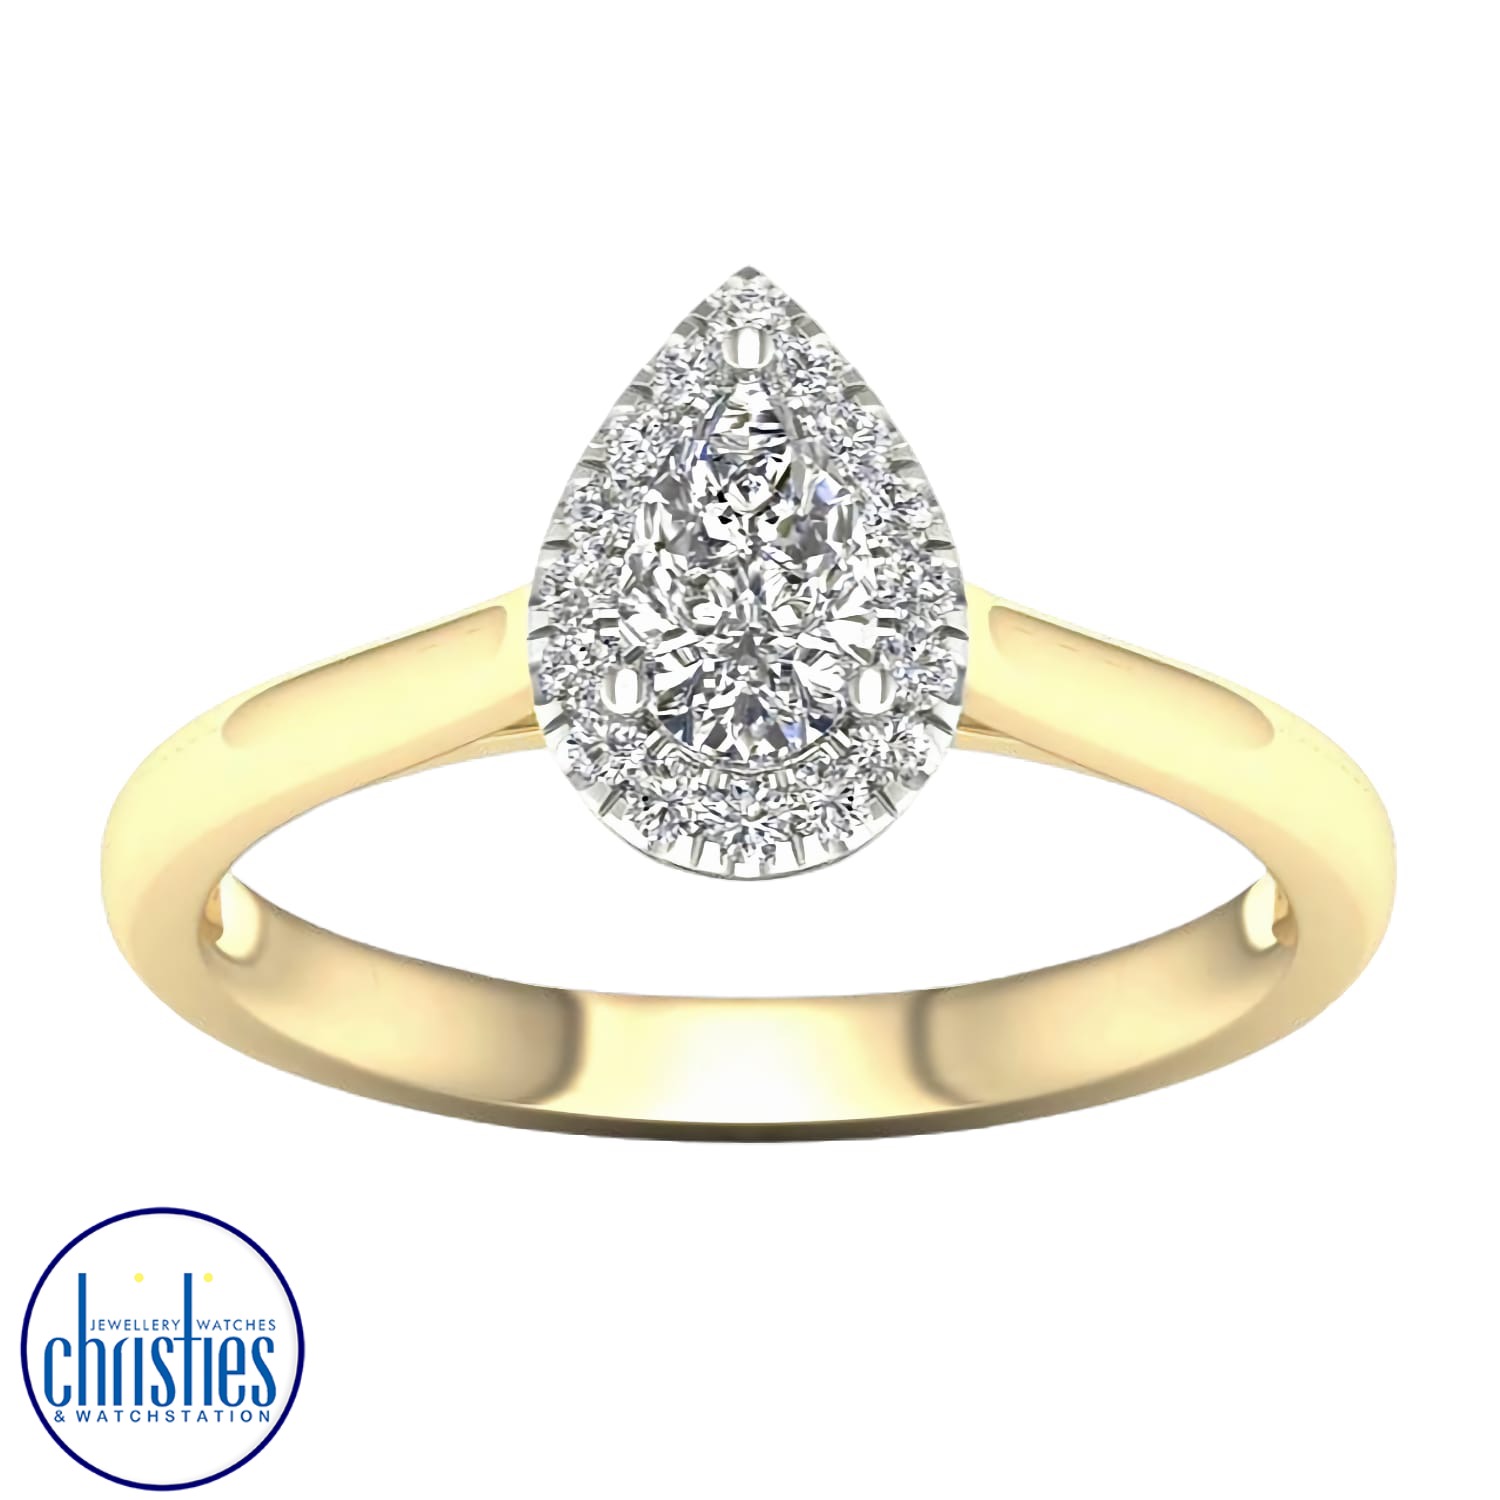 9ct Yellow Gold Diamond Engagement Ring 0.50ct TDW RB21177EG.  Affordable Engagement Rings Nz $3,395.00